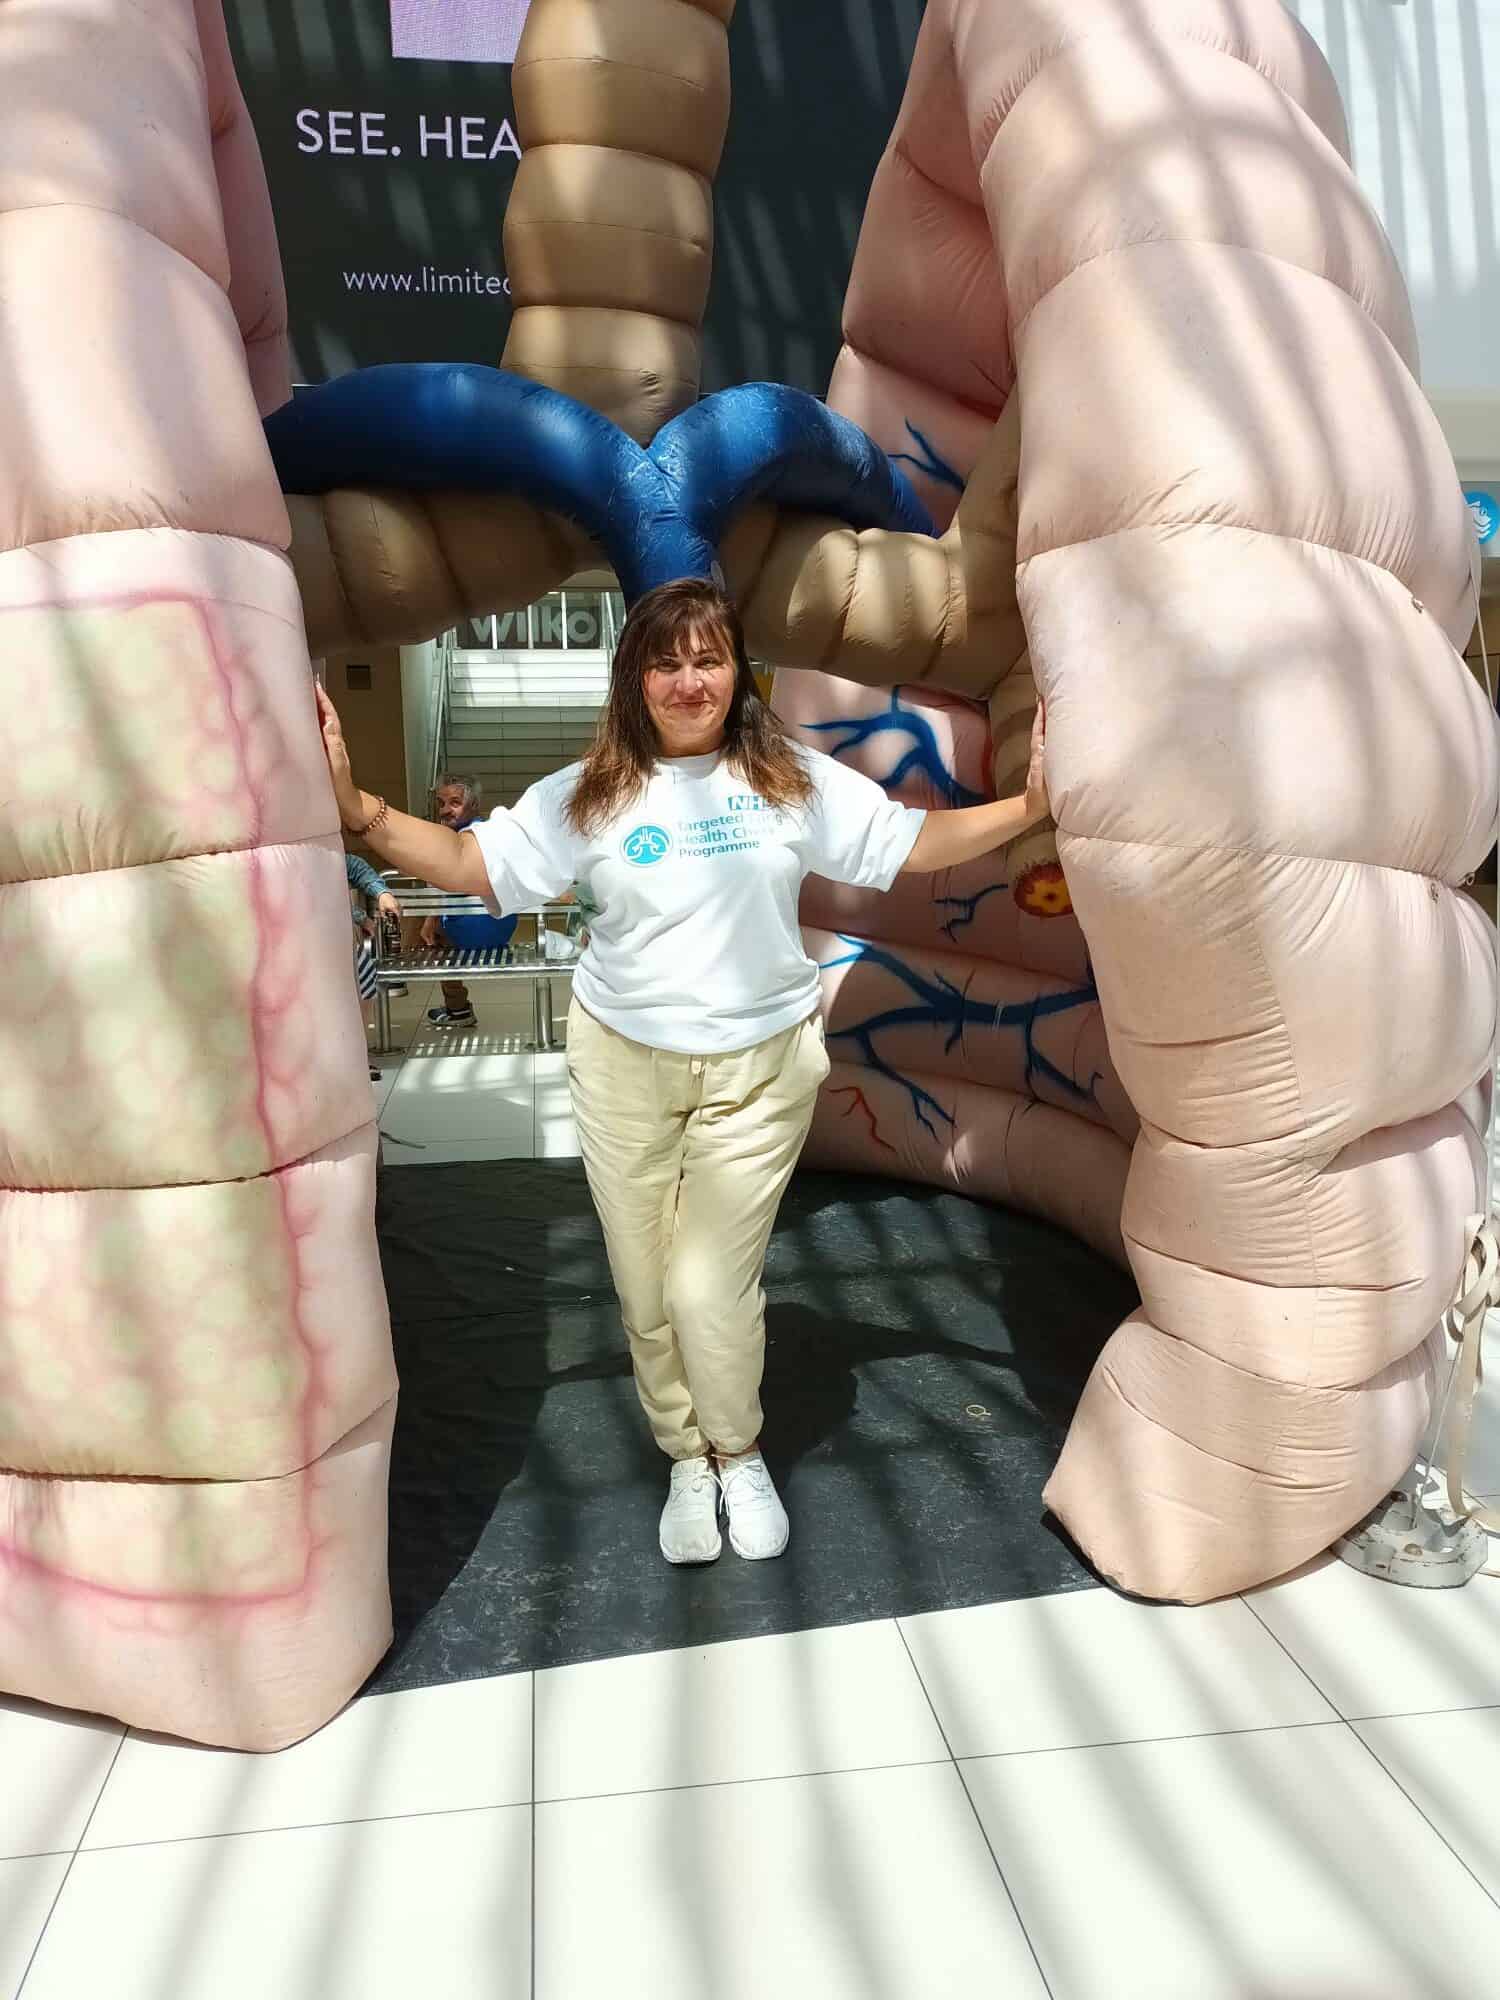 Woman stood in between giant inflatable lungs